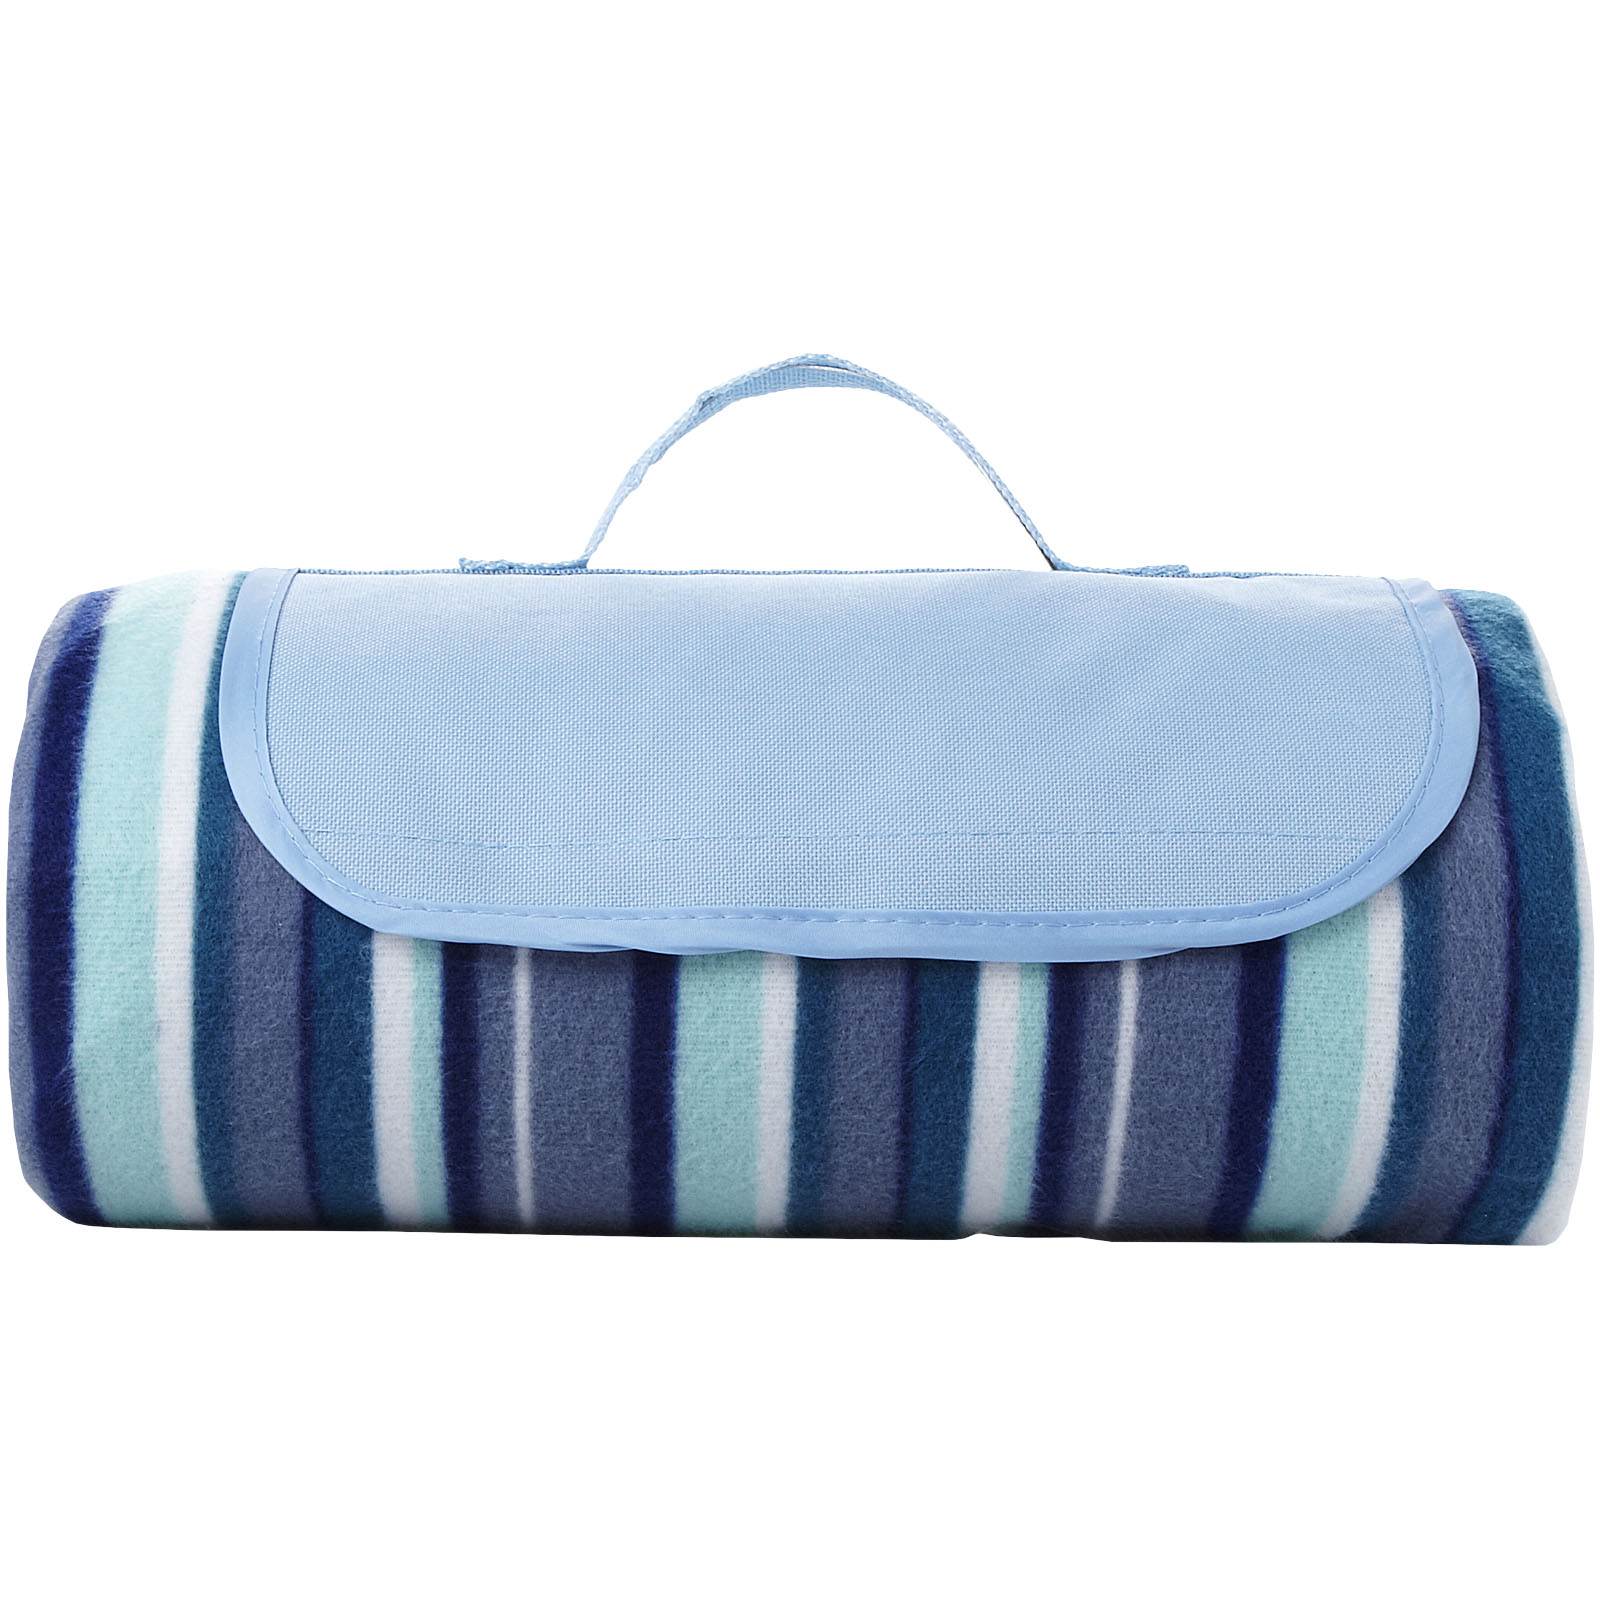 Advertising Picnic Accessories - Riviera water-resistant outdoor picnic blanket - 1